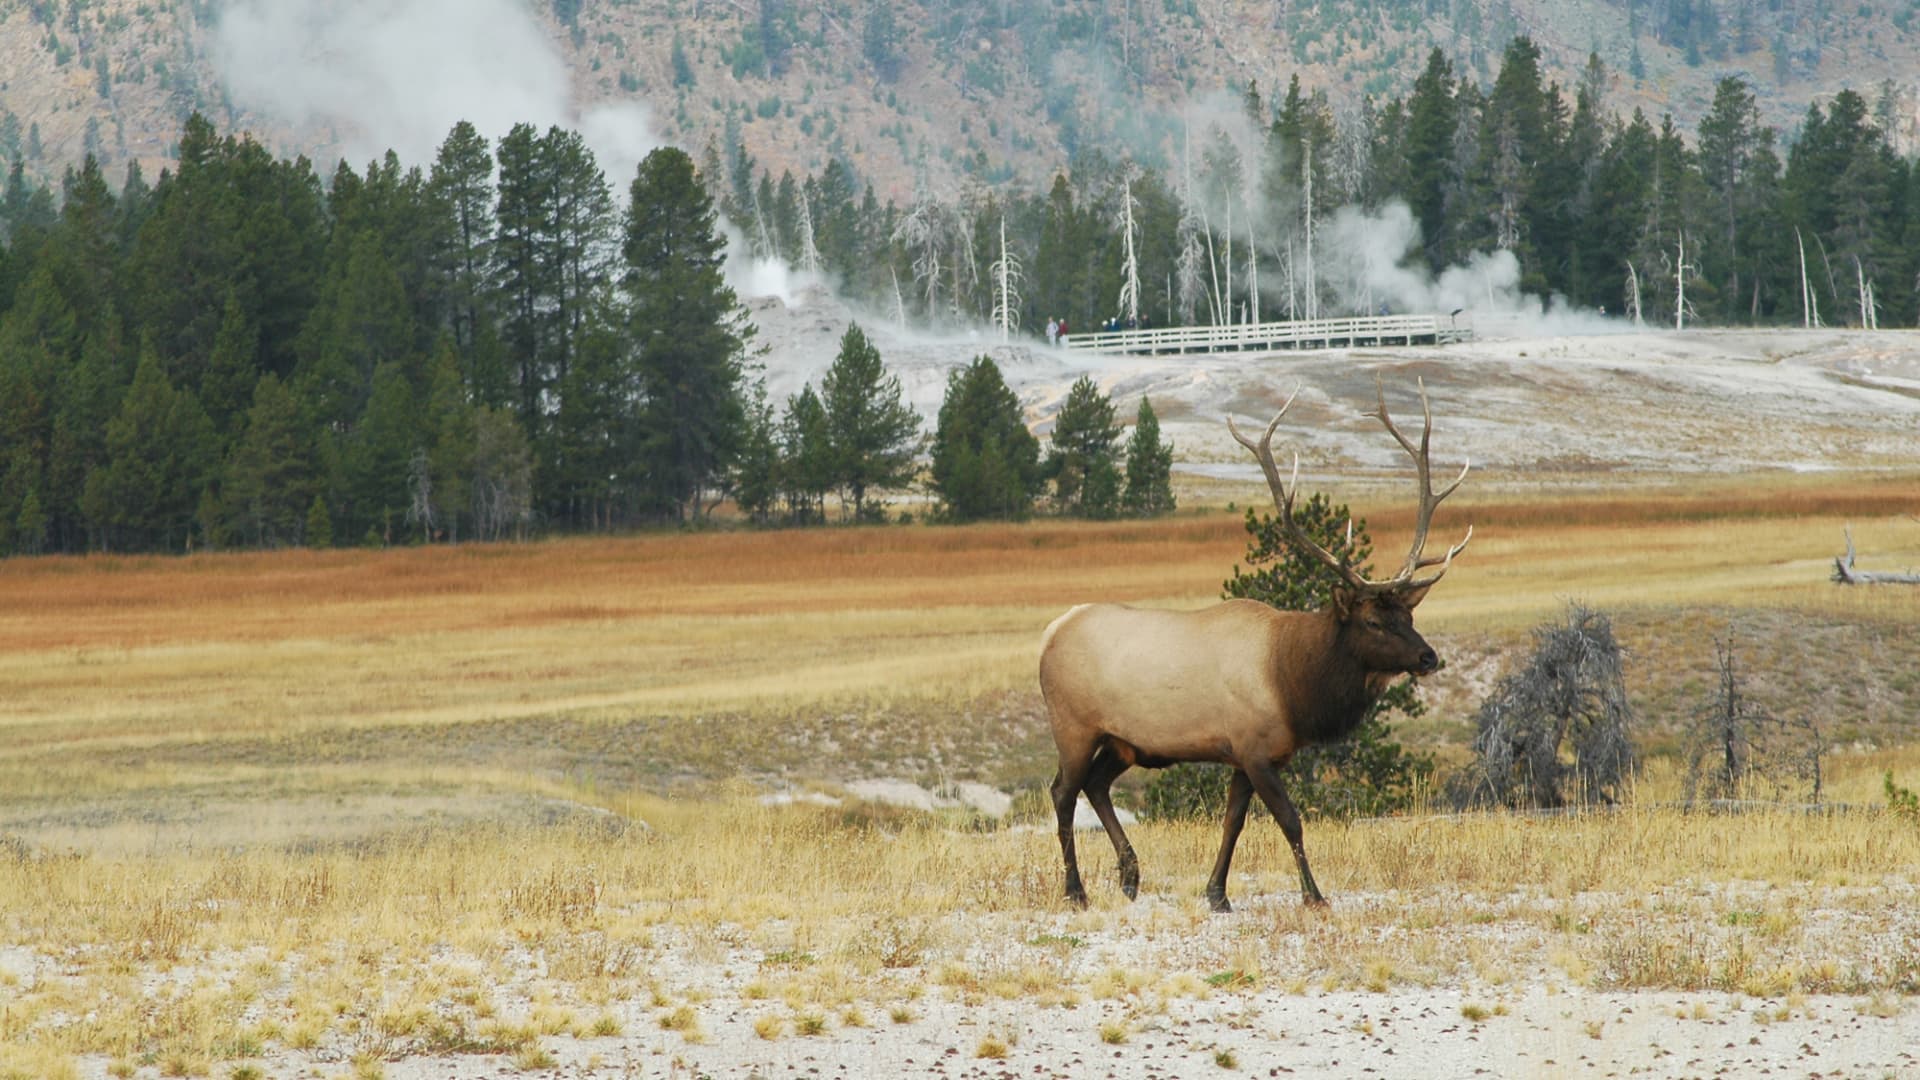 Elk at Old Faithful in Yellowstone National Park